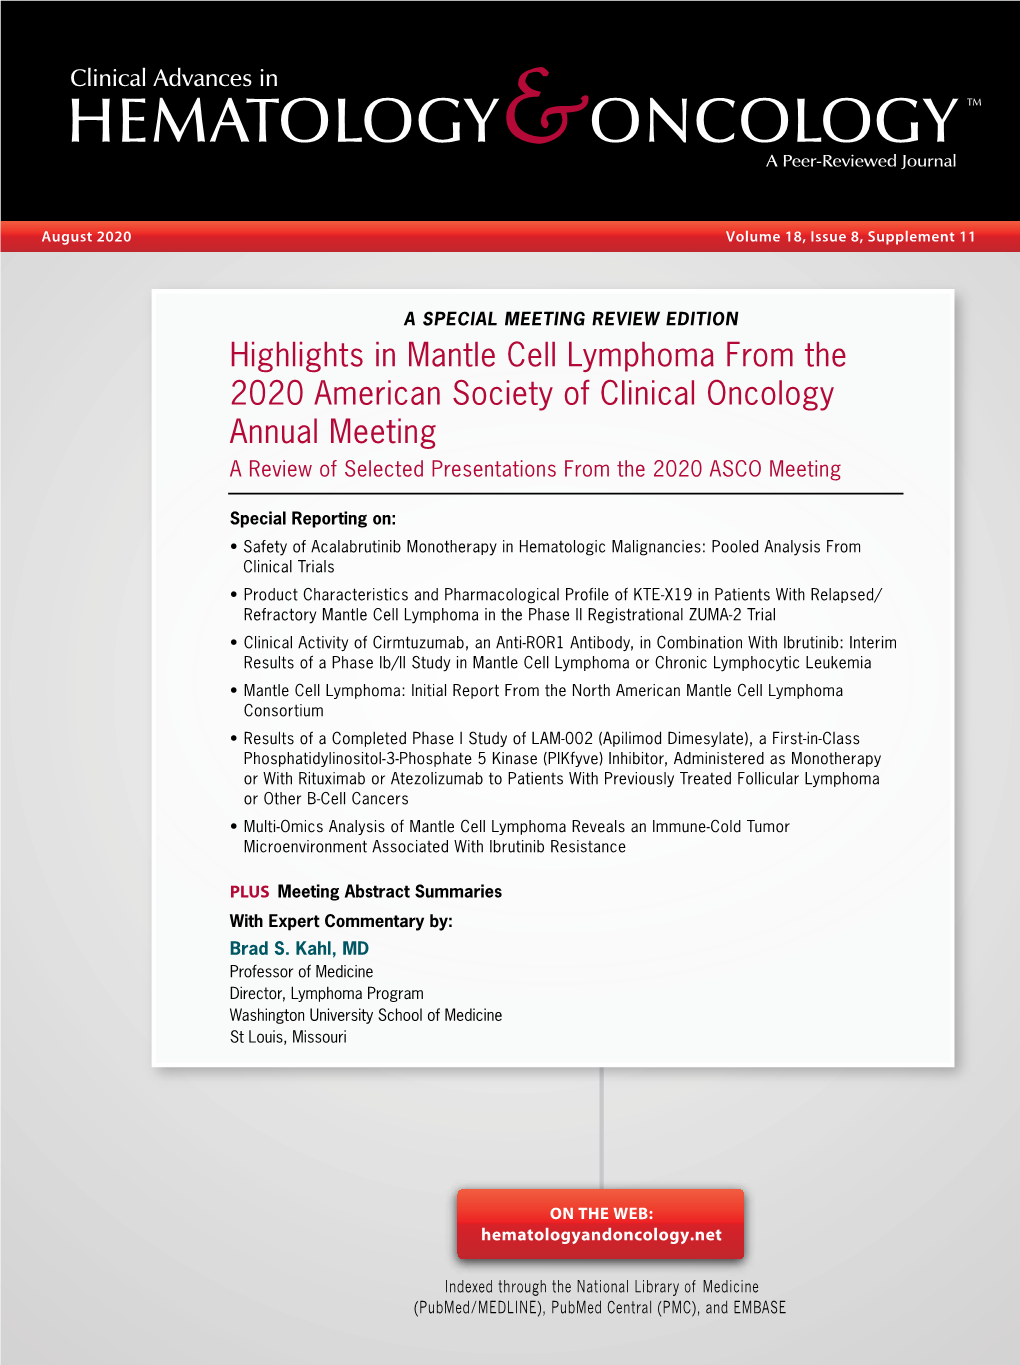 Highlights in Mantle Cell Lymphoma from the 2020 American Society of Clinical Oncology Annual Meeting